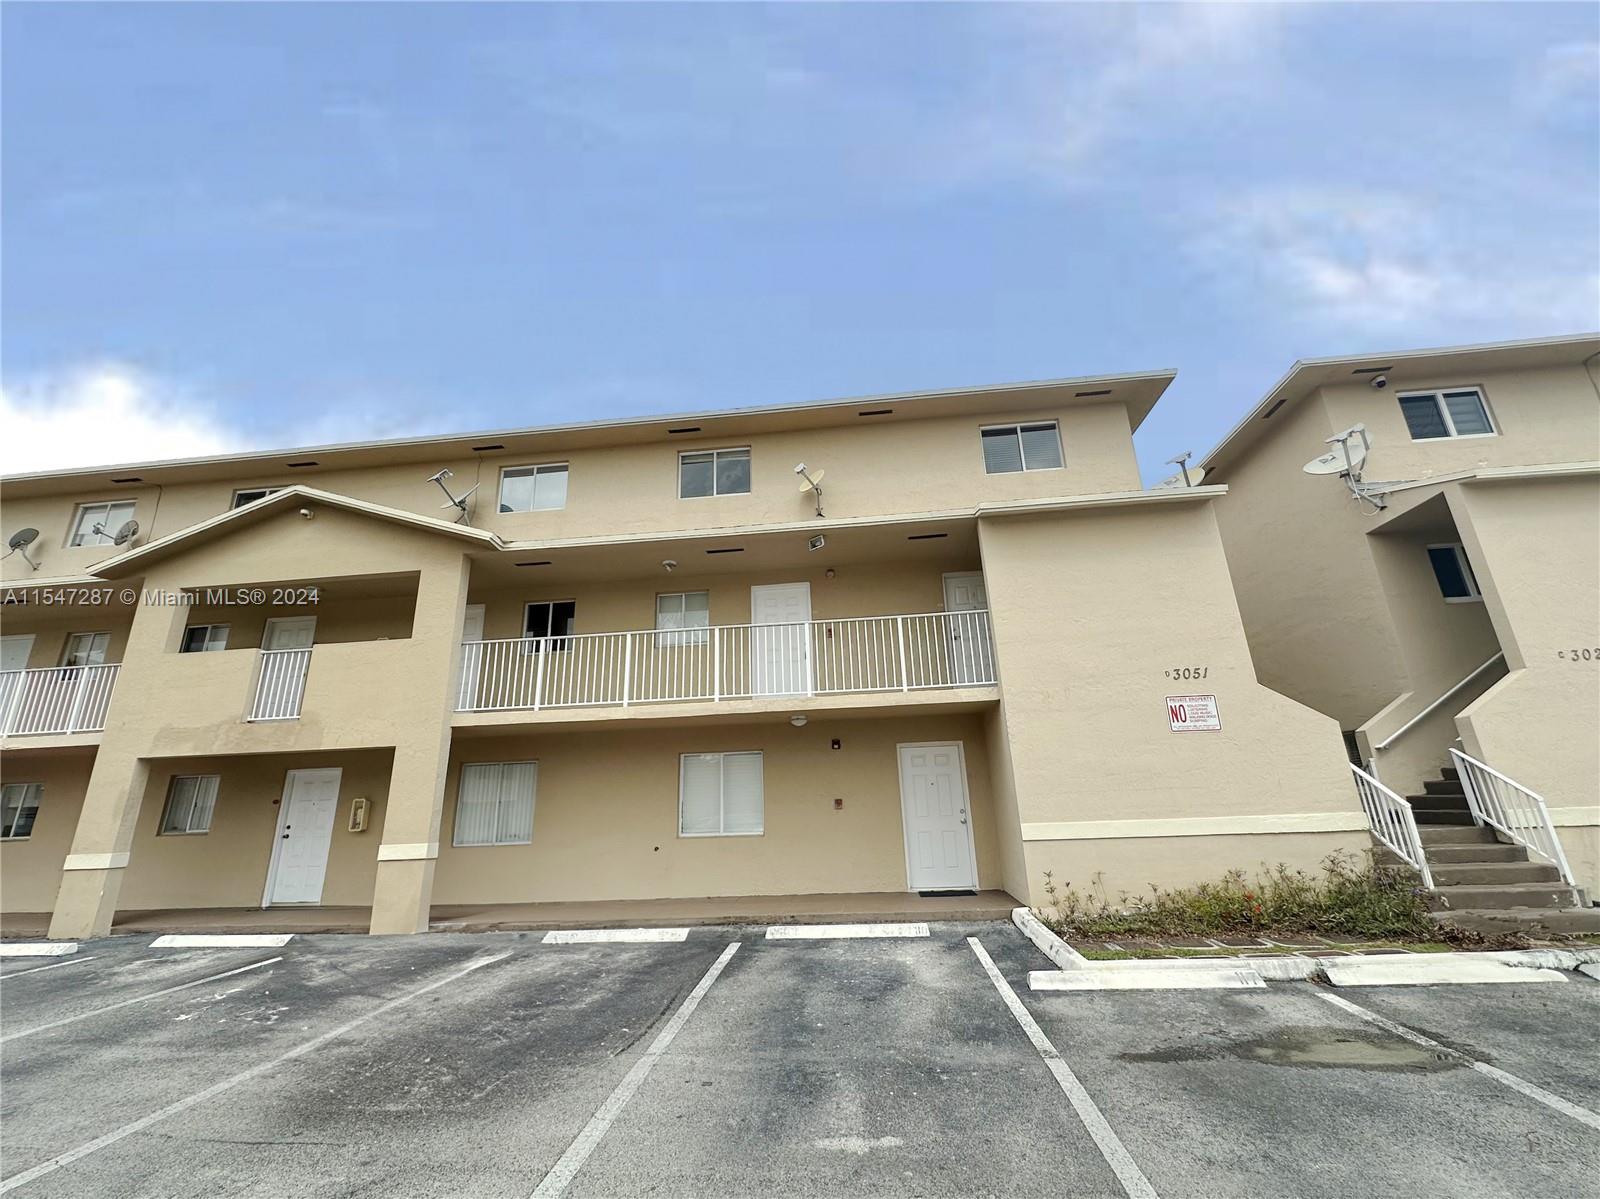 3051 W 76th St D-211, Hialeah, Florida 33018, 2 Bedrooms Bedrooms, ,1 BathroomBathrooms,Residential,For Sale,3051 W 76th St D-211,A11547287